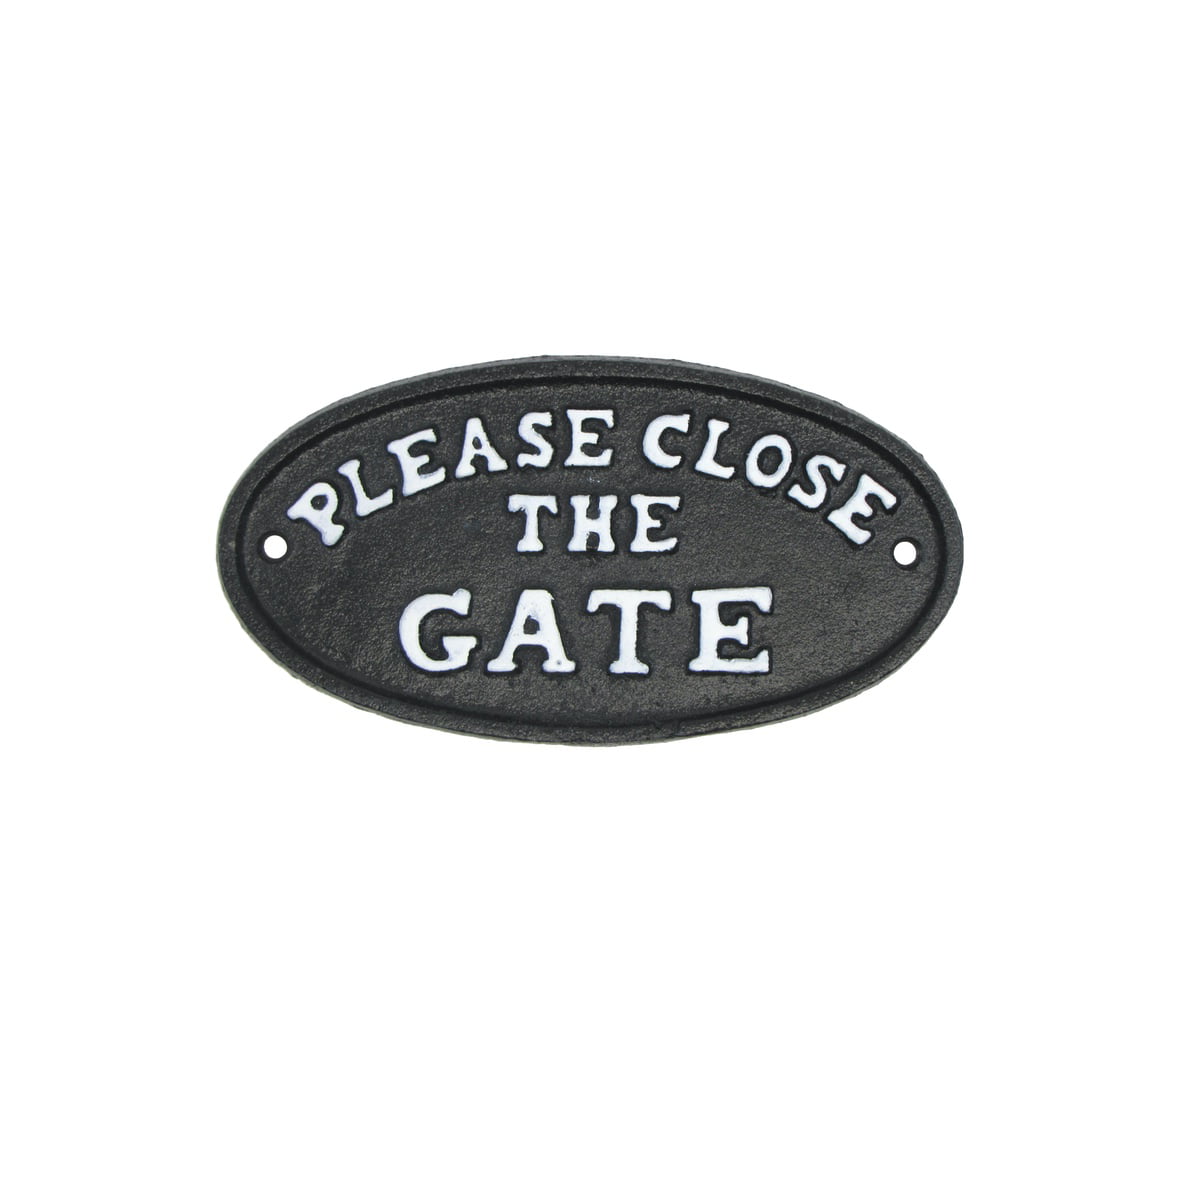 GATE SIGN VINTAGE RETRO STYLE NOTICE CAST IRON Shut The Front Door SIGN